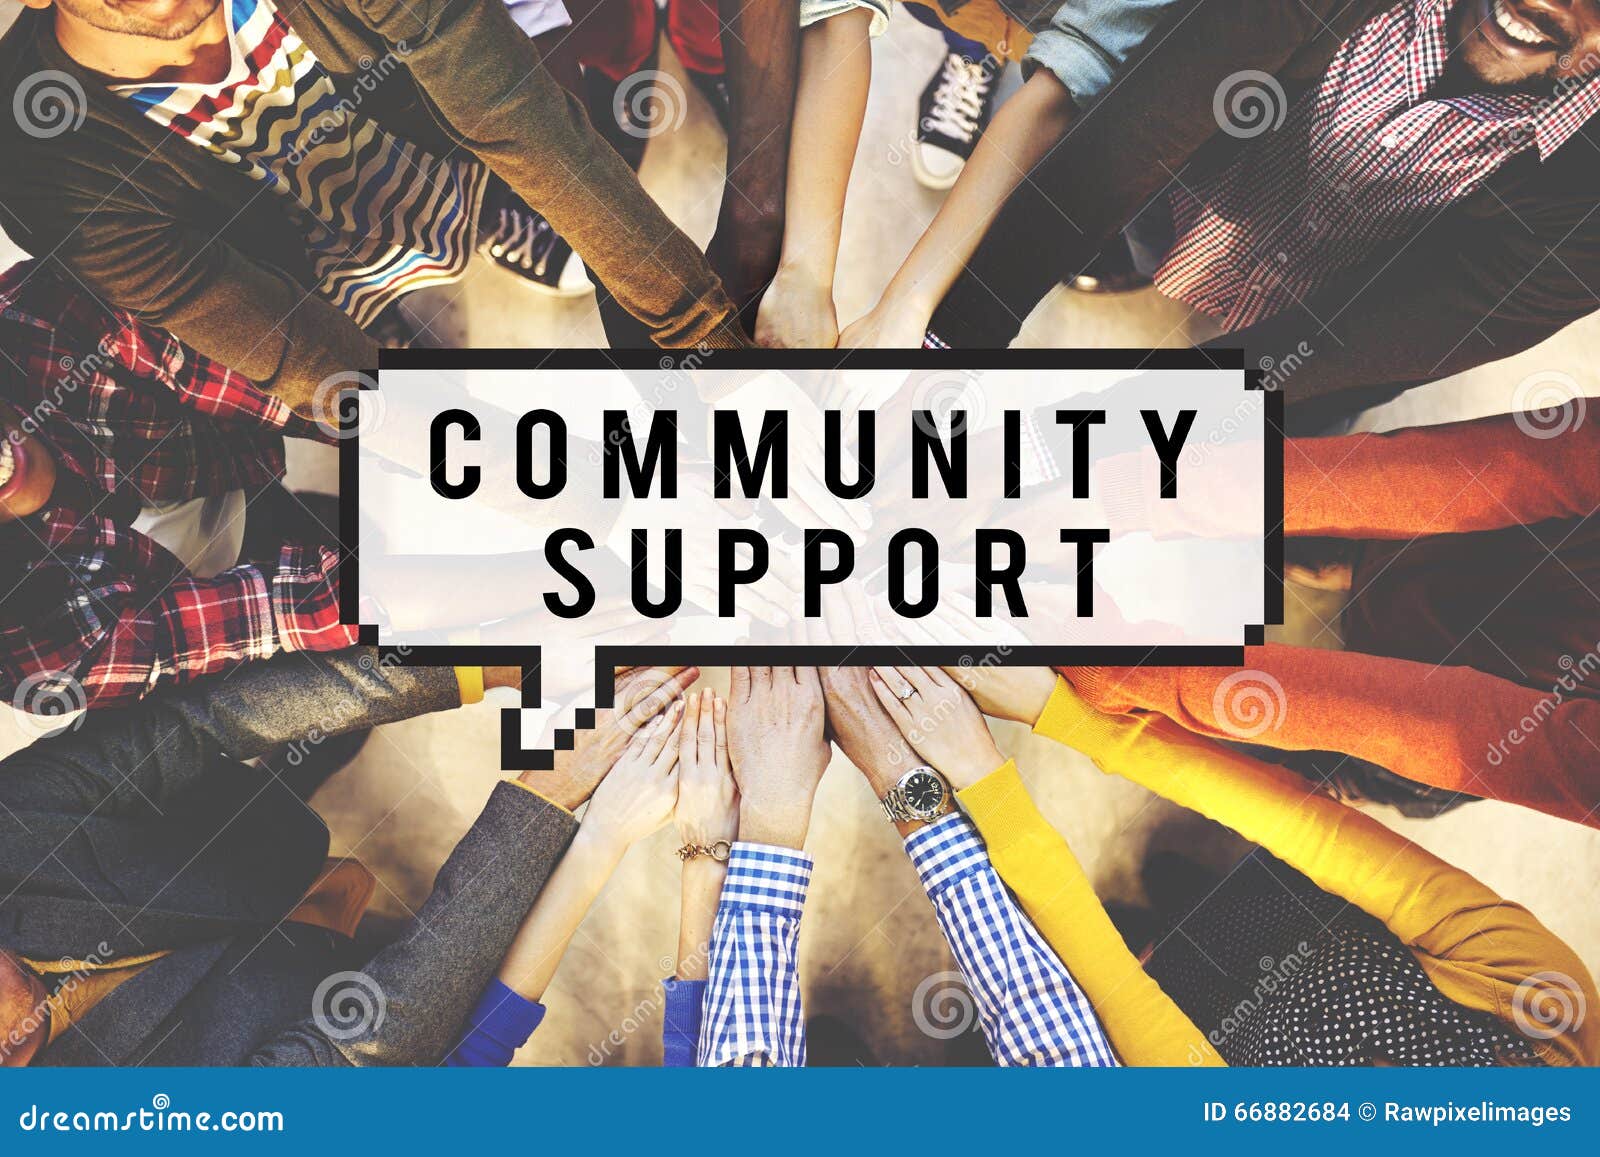 community support connection togetherness society concept